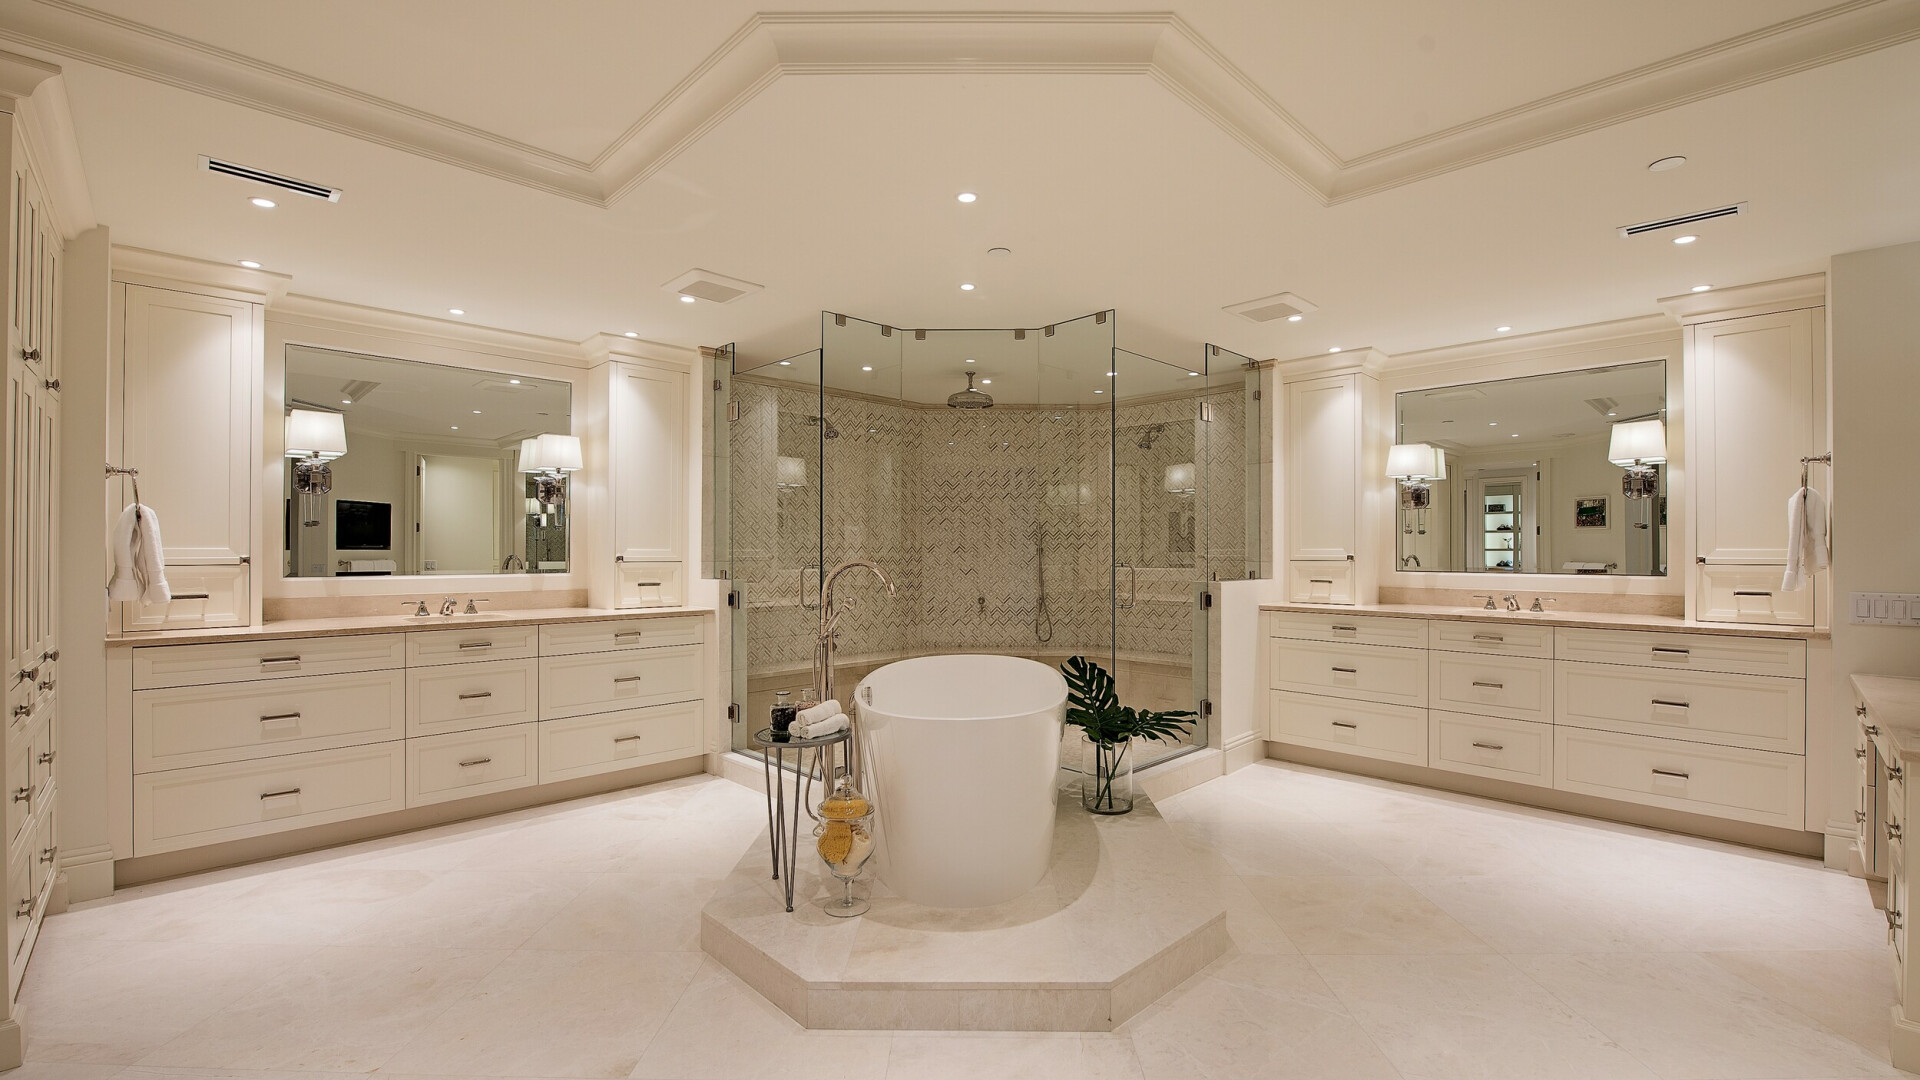 Primary bathroom boasting an oversized floating tub and walk-in shower, St. Petersburg FL